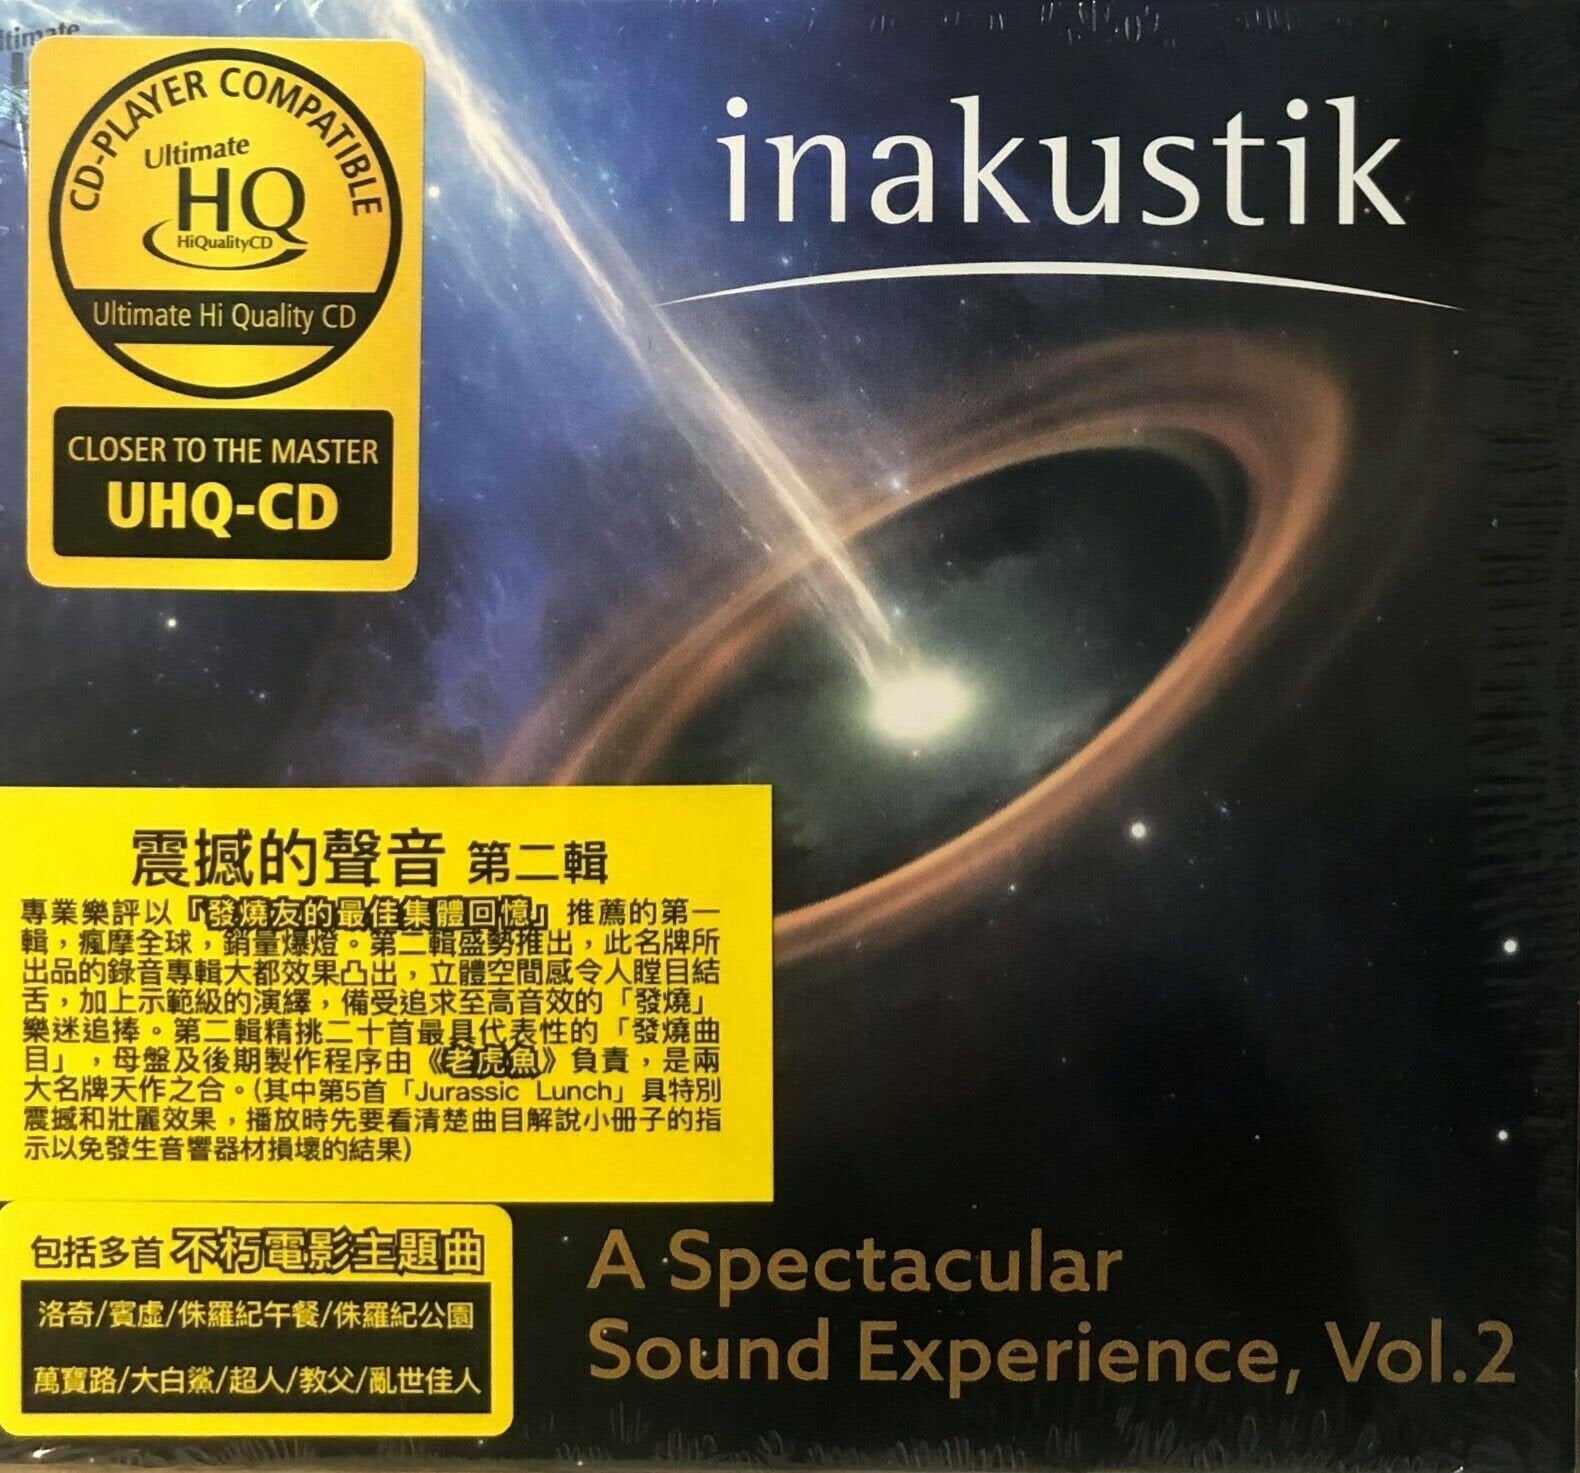 A SPECTACULAR SOUND EXPERIENCE VOL 2 - VARIOUS ARTISTS (UHQCD) CD